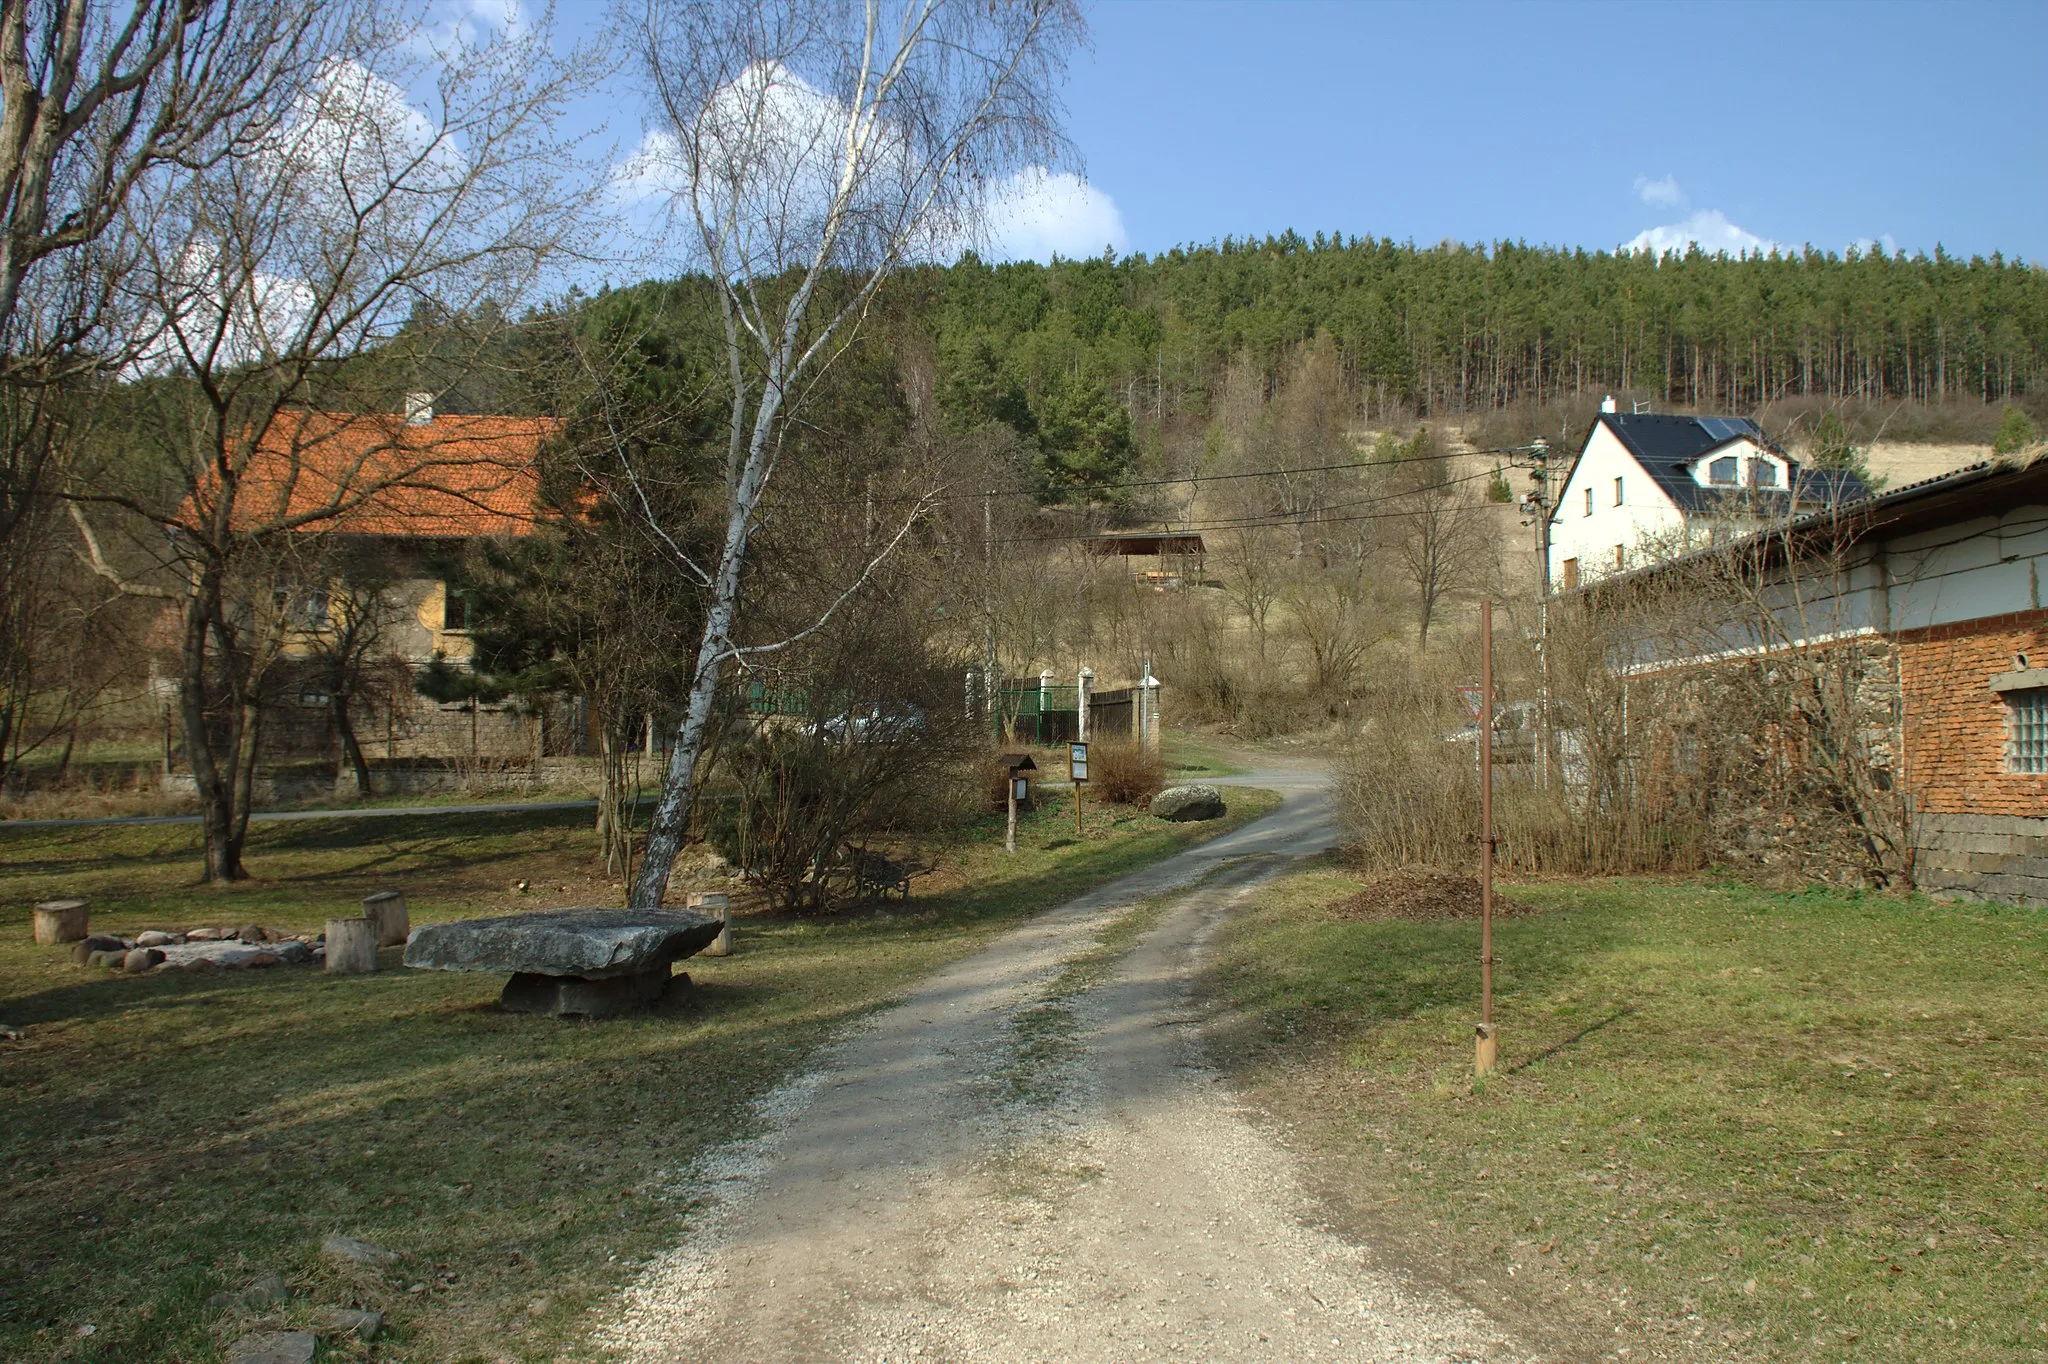 Photo showing: The village of Slavíky (part of the town of Tmaň) in Central Bohemian Region, CZ